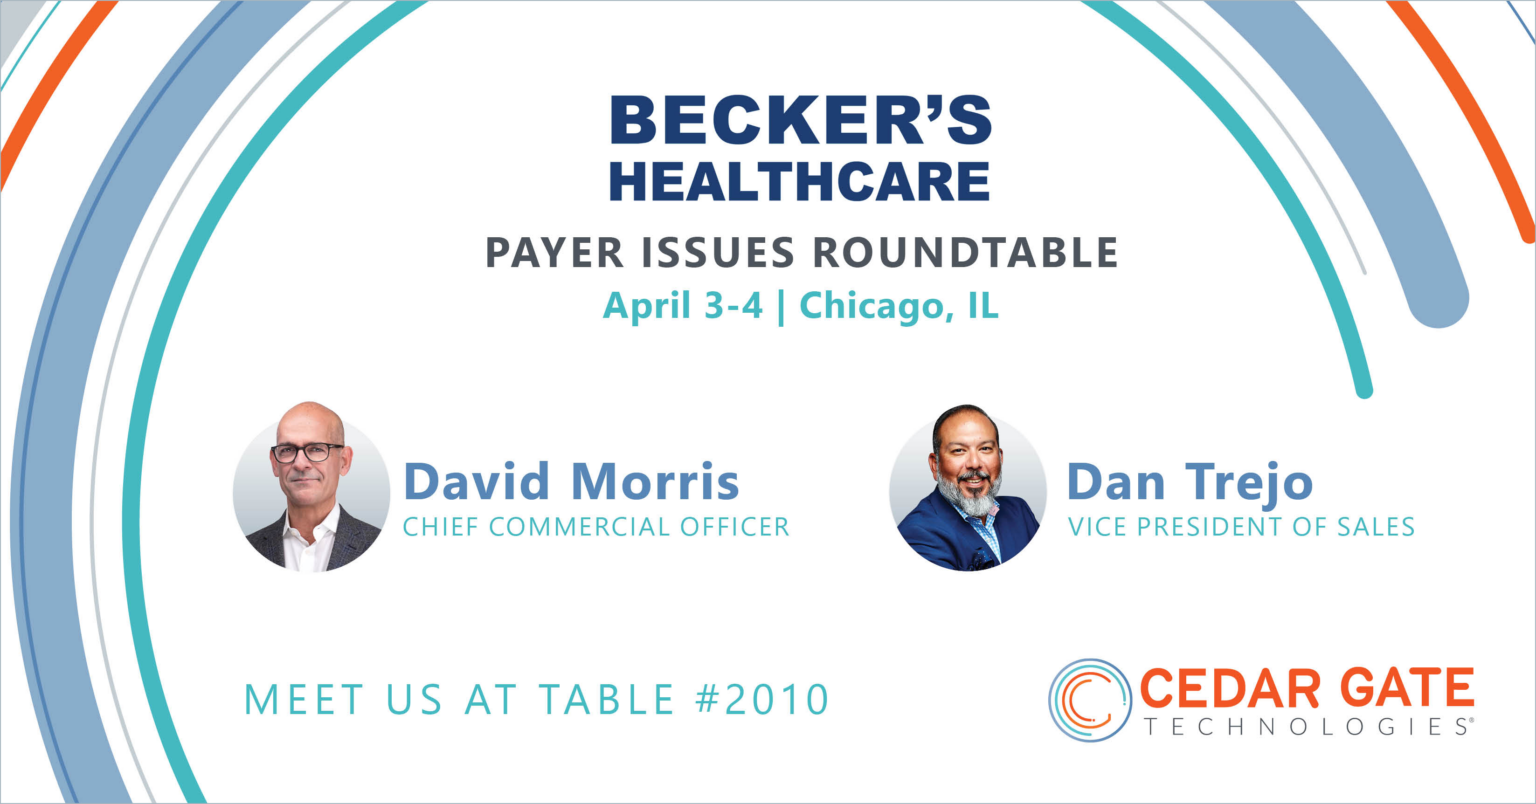 Becker's Healthcare Payer Issues Roundtable Cedar Gate Technologies